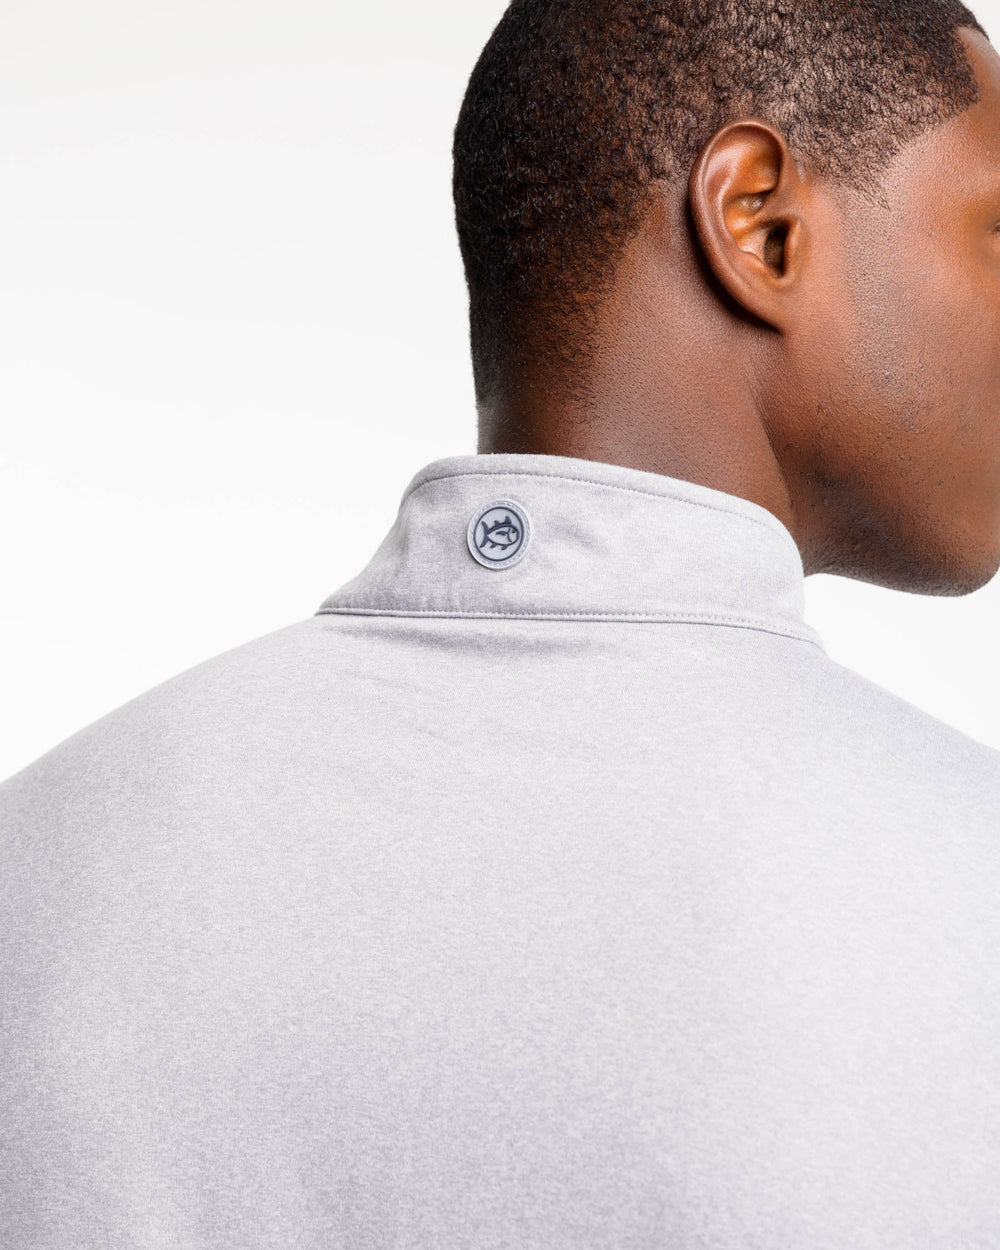 The yoke view of the Backbarrier Heather Performance Quarter Zip Pullover by Southern Tide - Heather Steel Grey